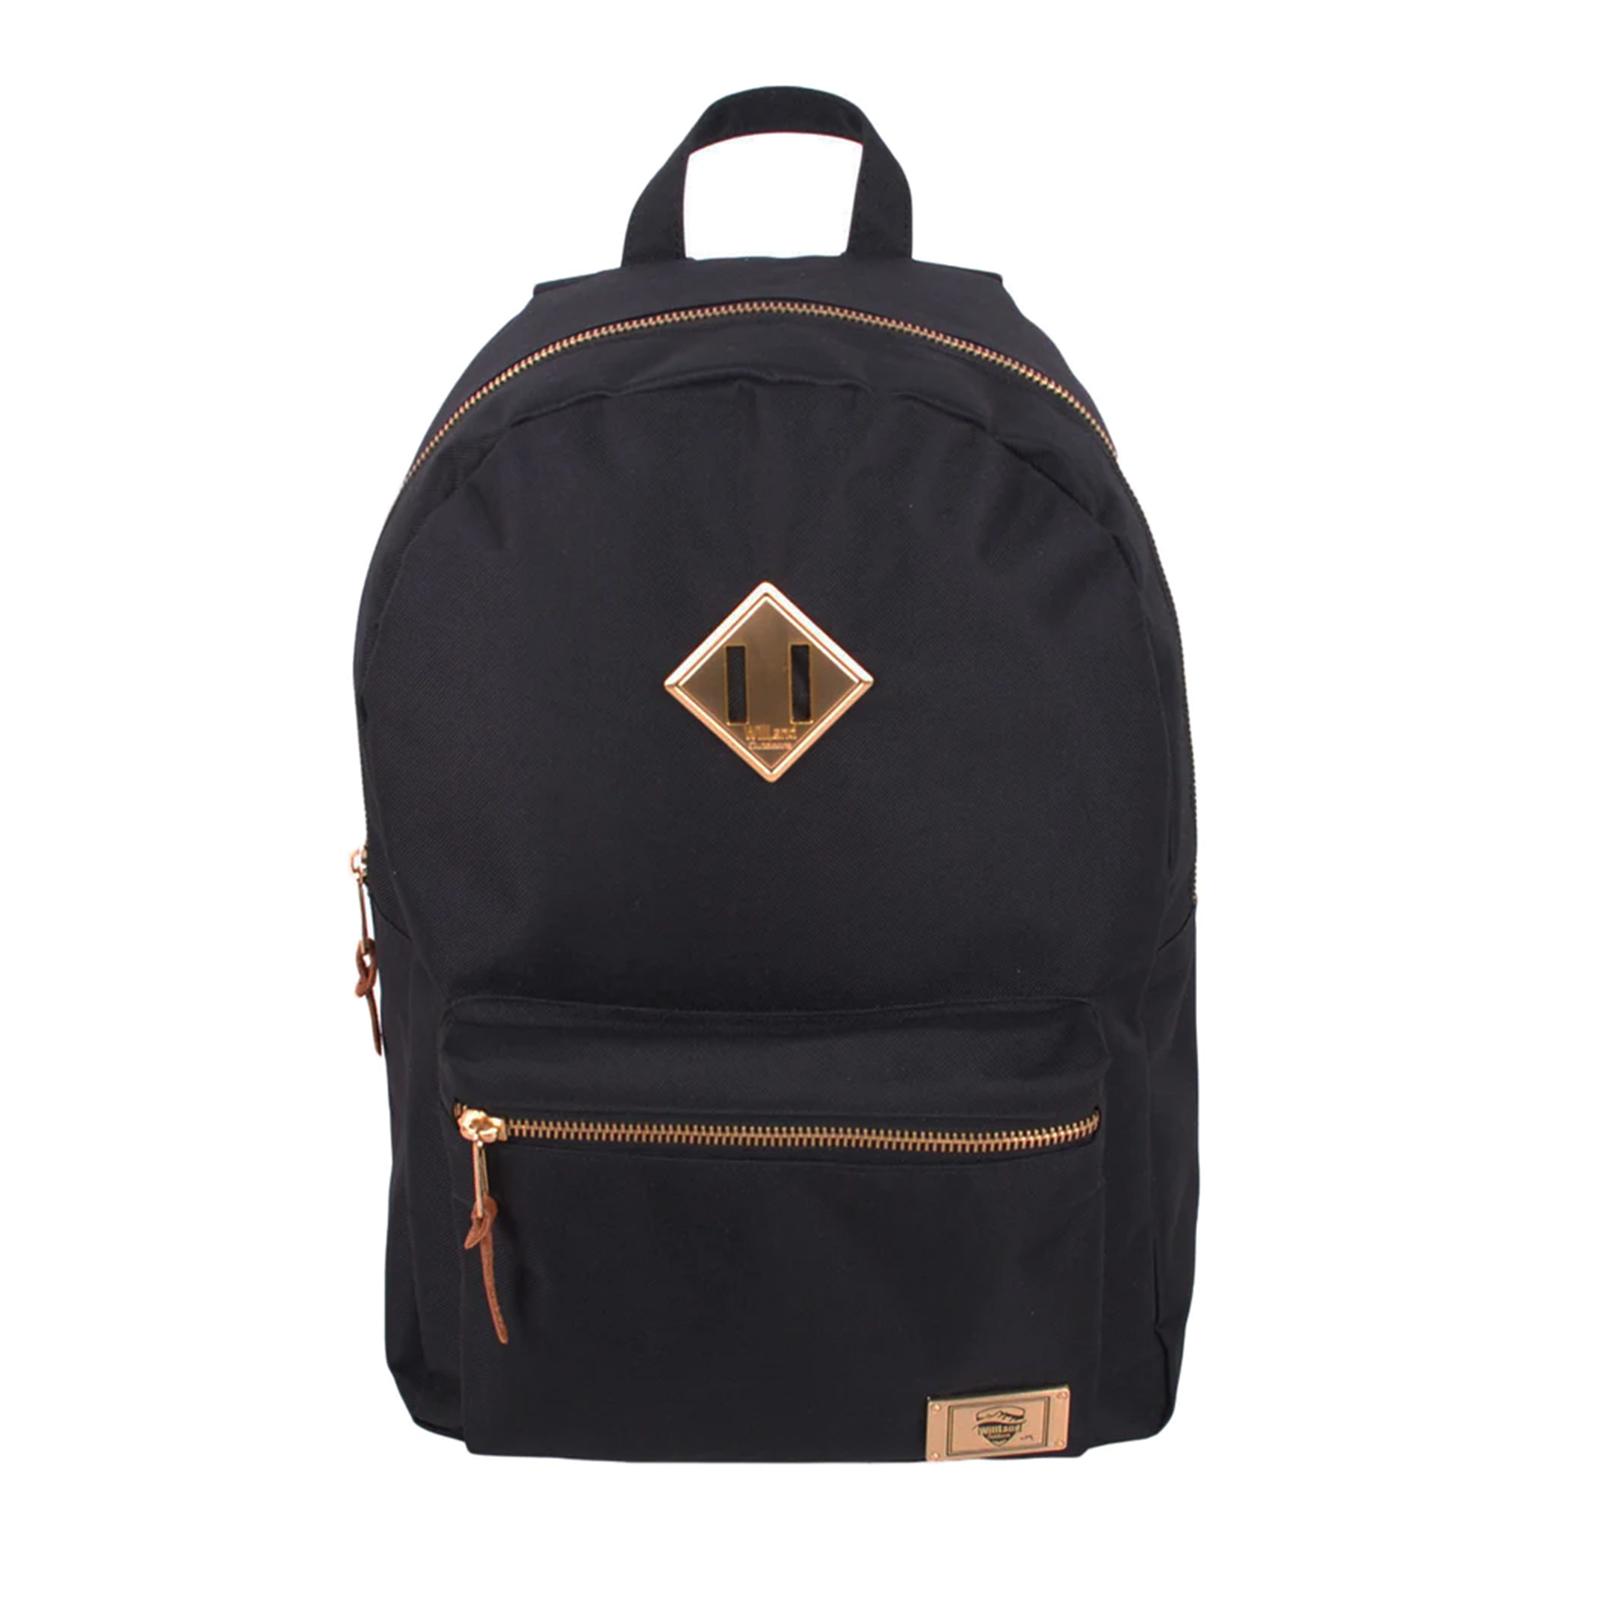 BACKPACK: GROTTO